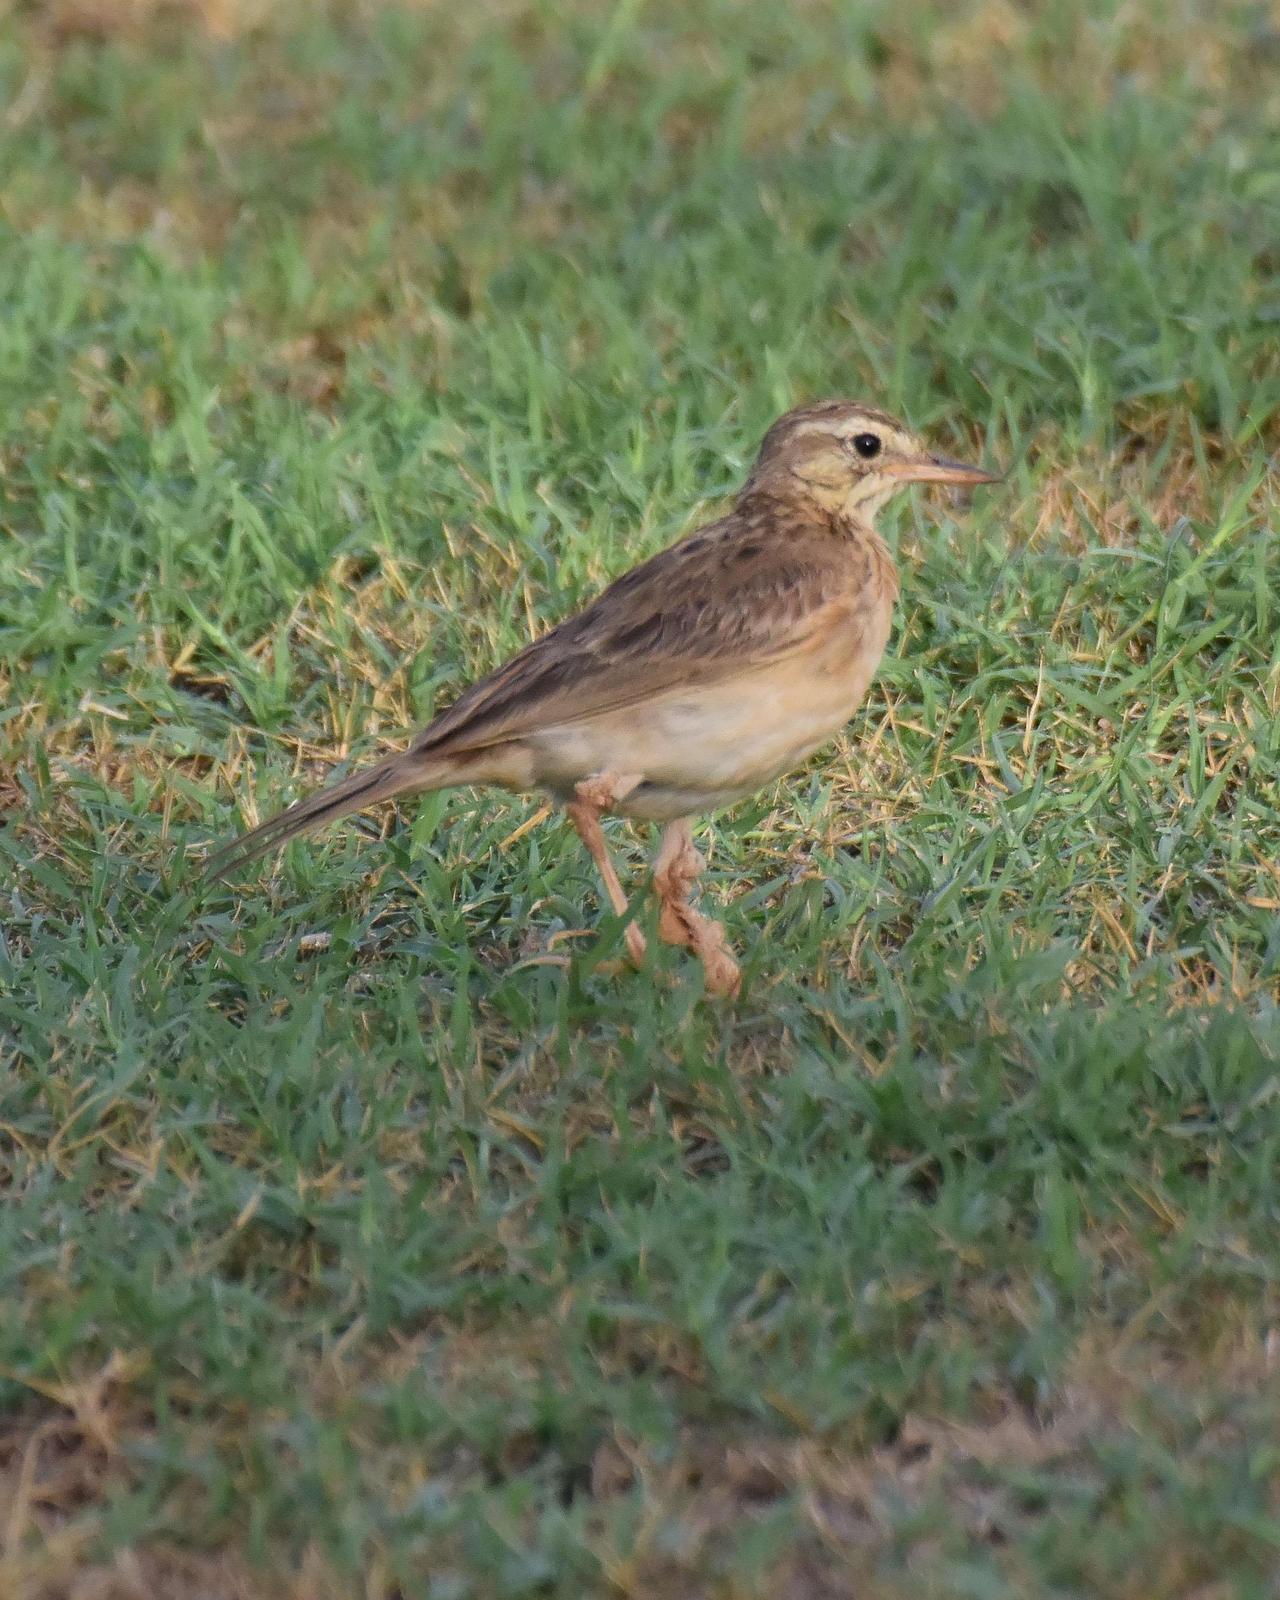 Paddyfield Pipit Photo by Steve Percival